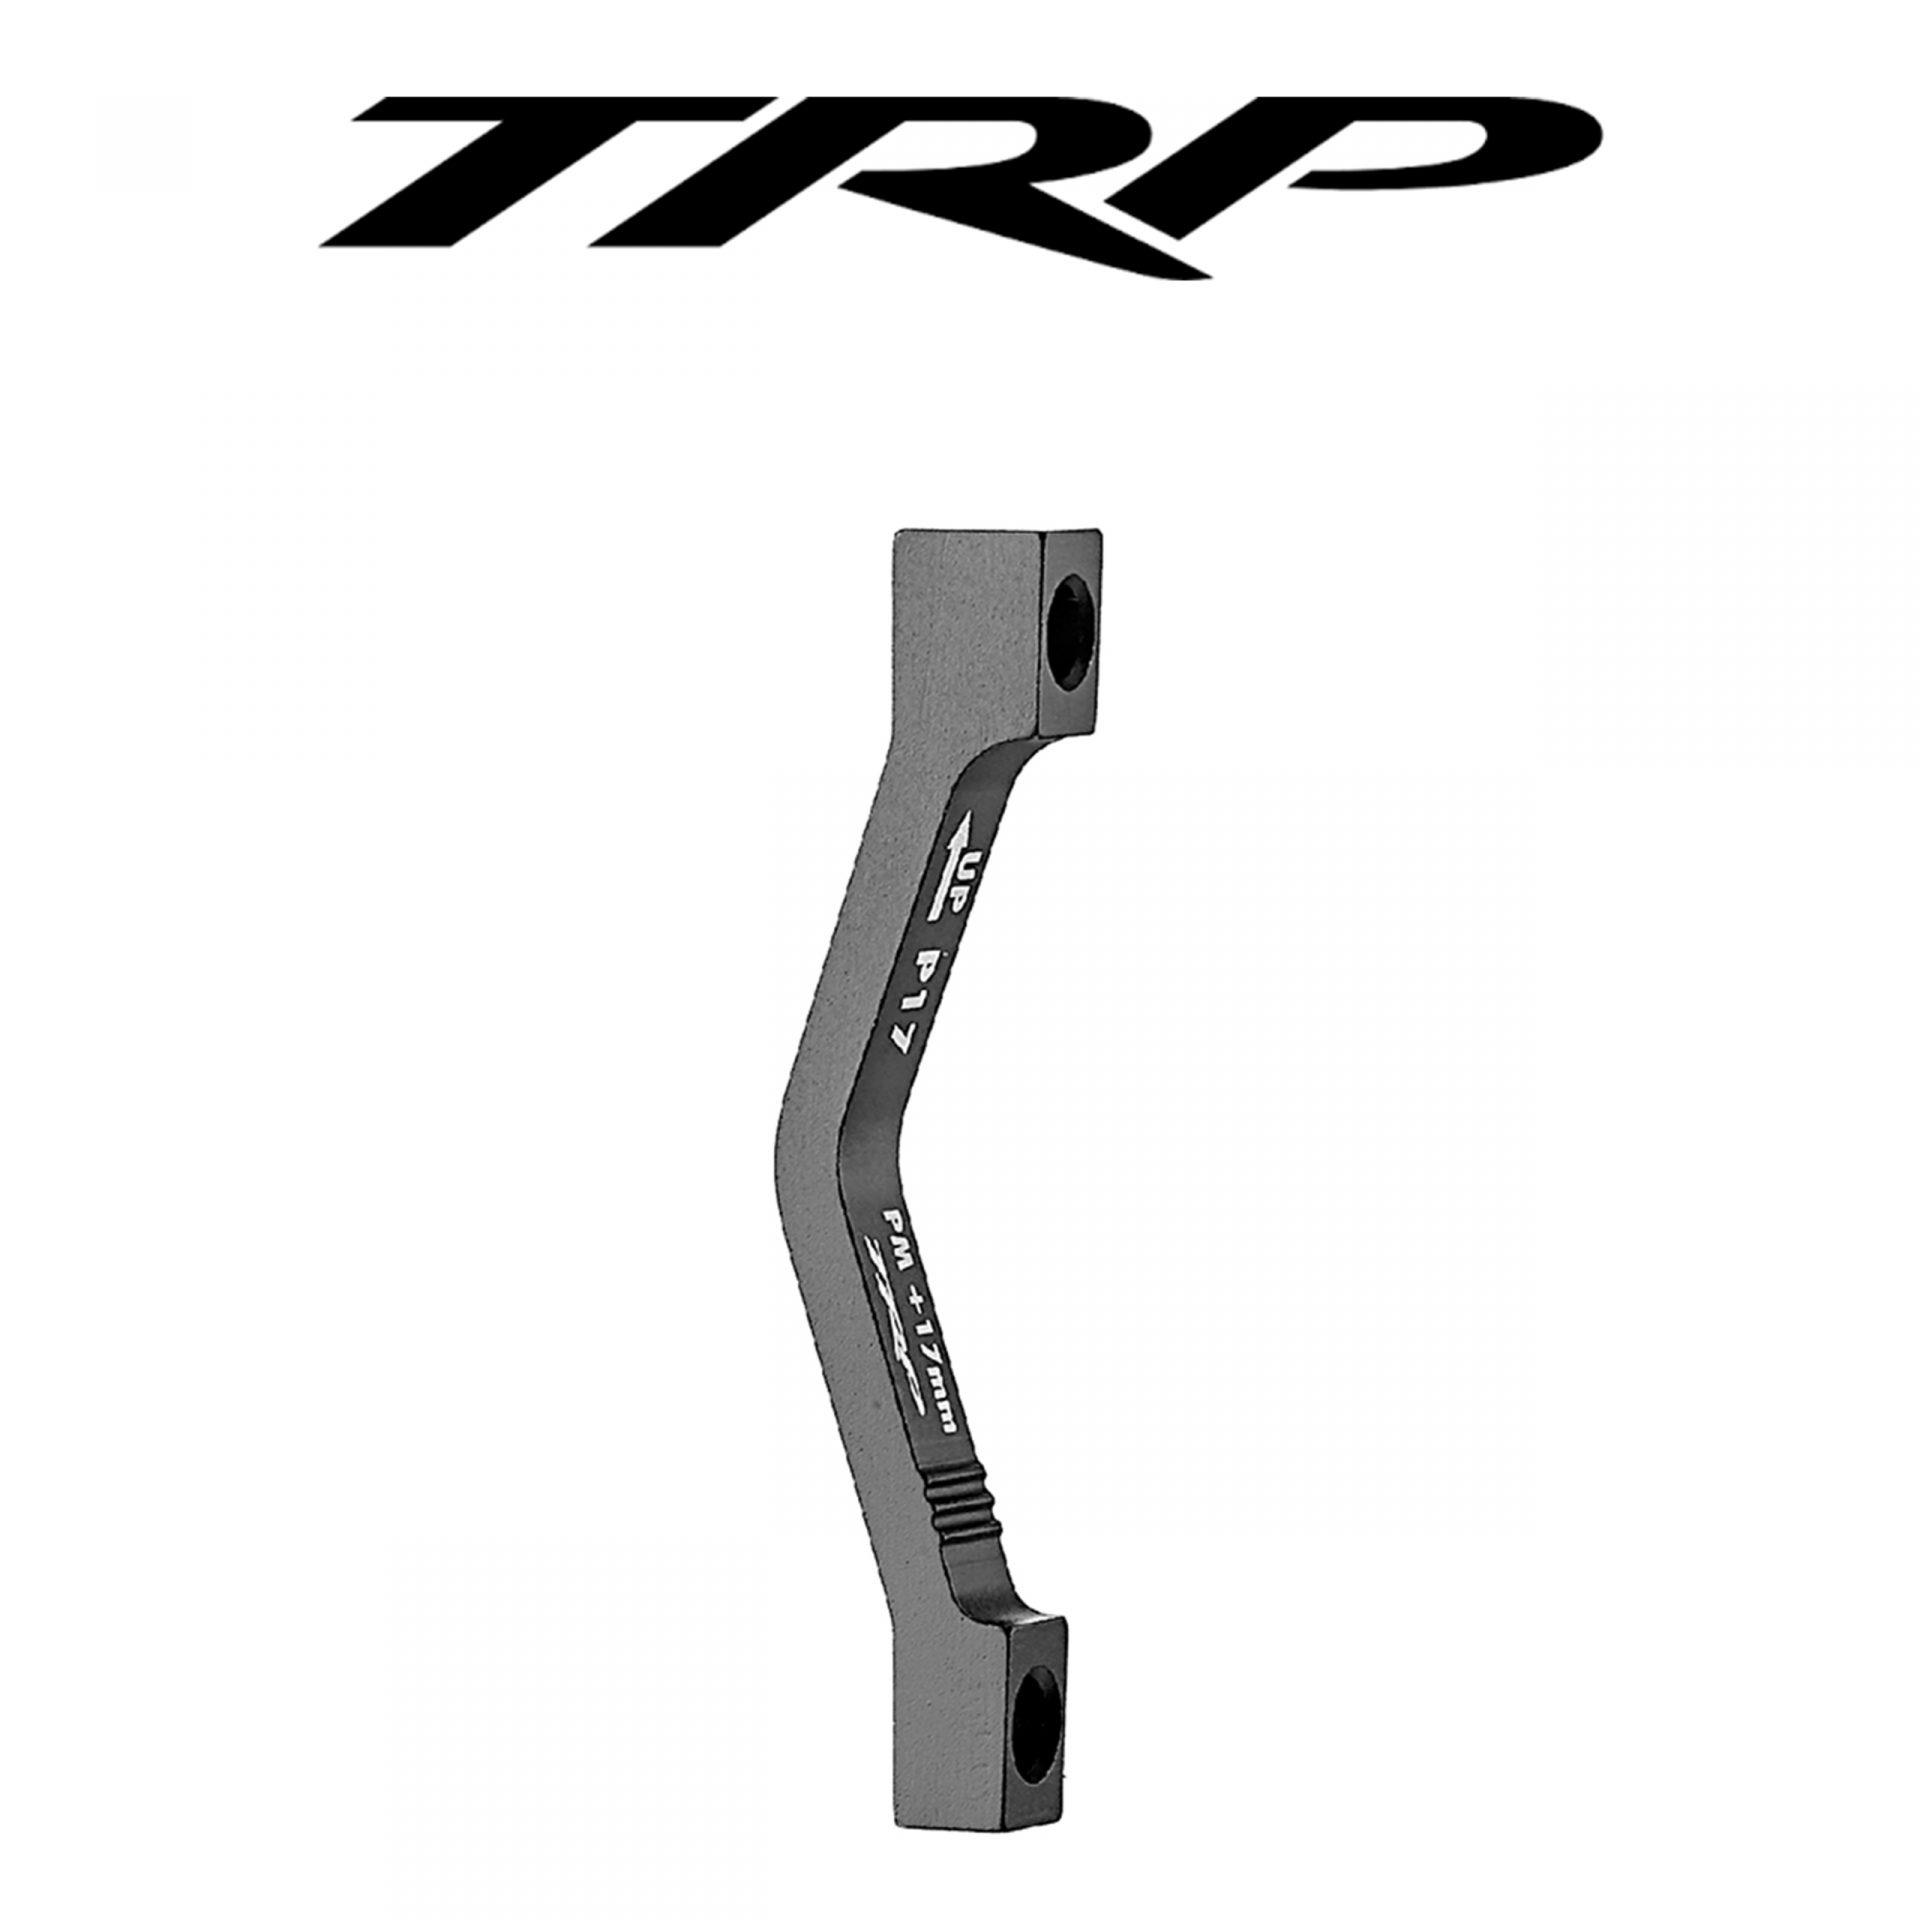 trp adapter pm +17 mm